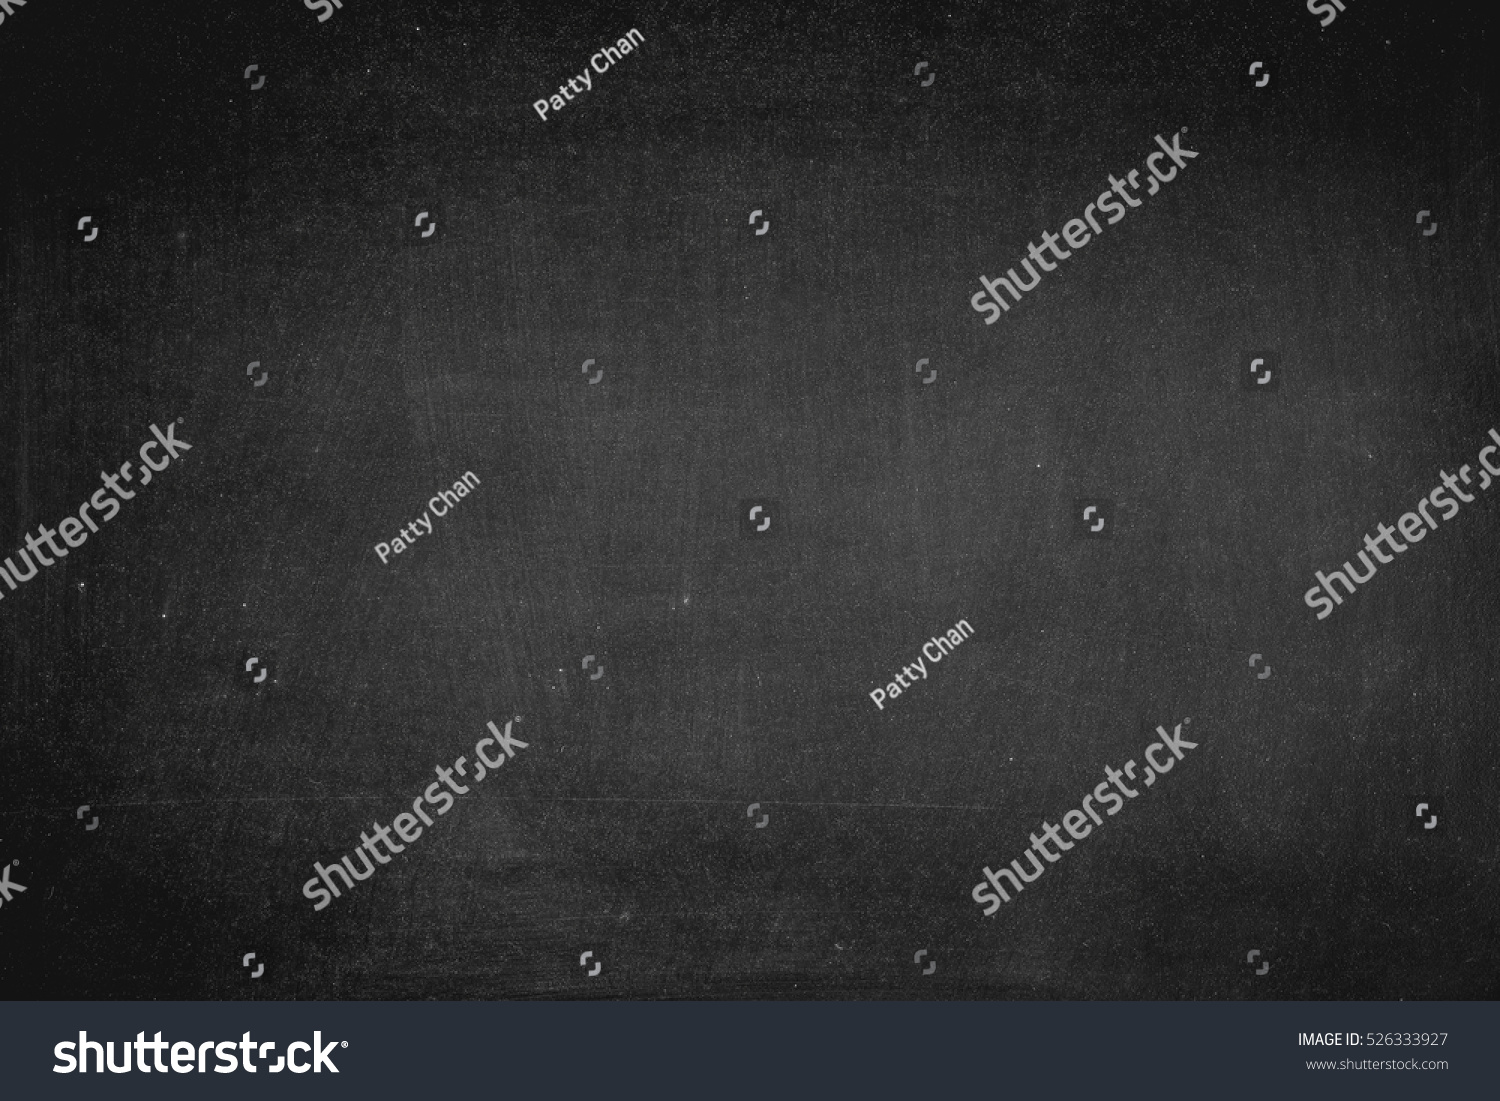 Abstract Chalk rubbed out on blackboard for background. texture for add text or graphic design. #526333927